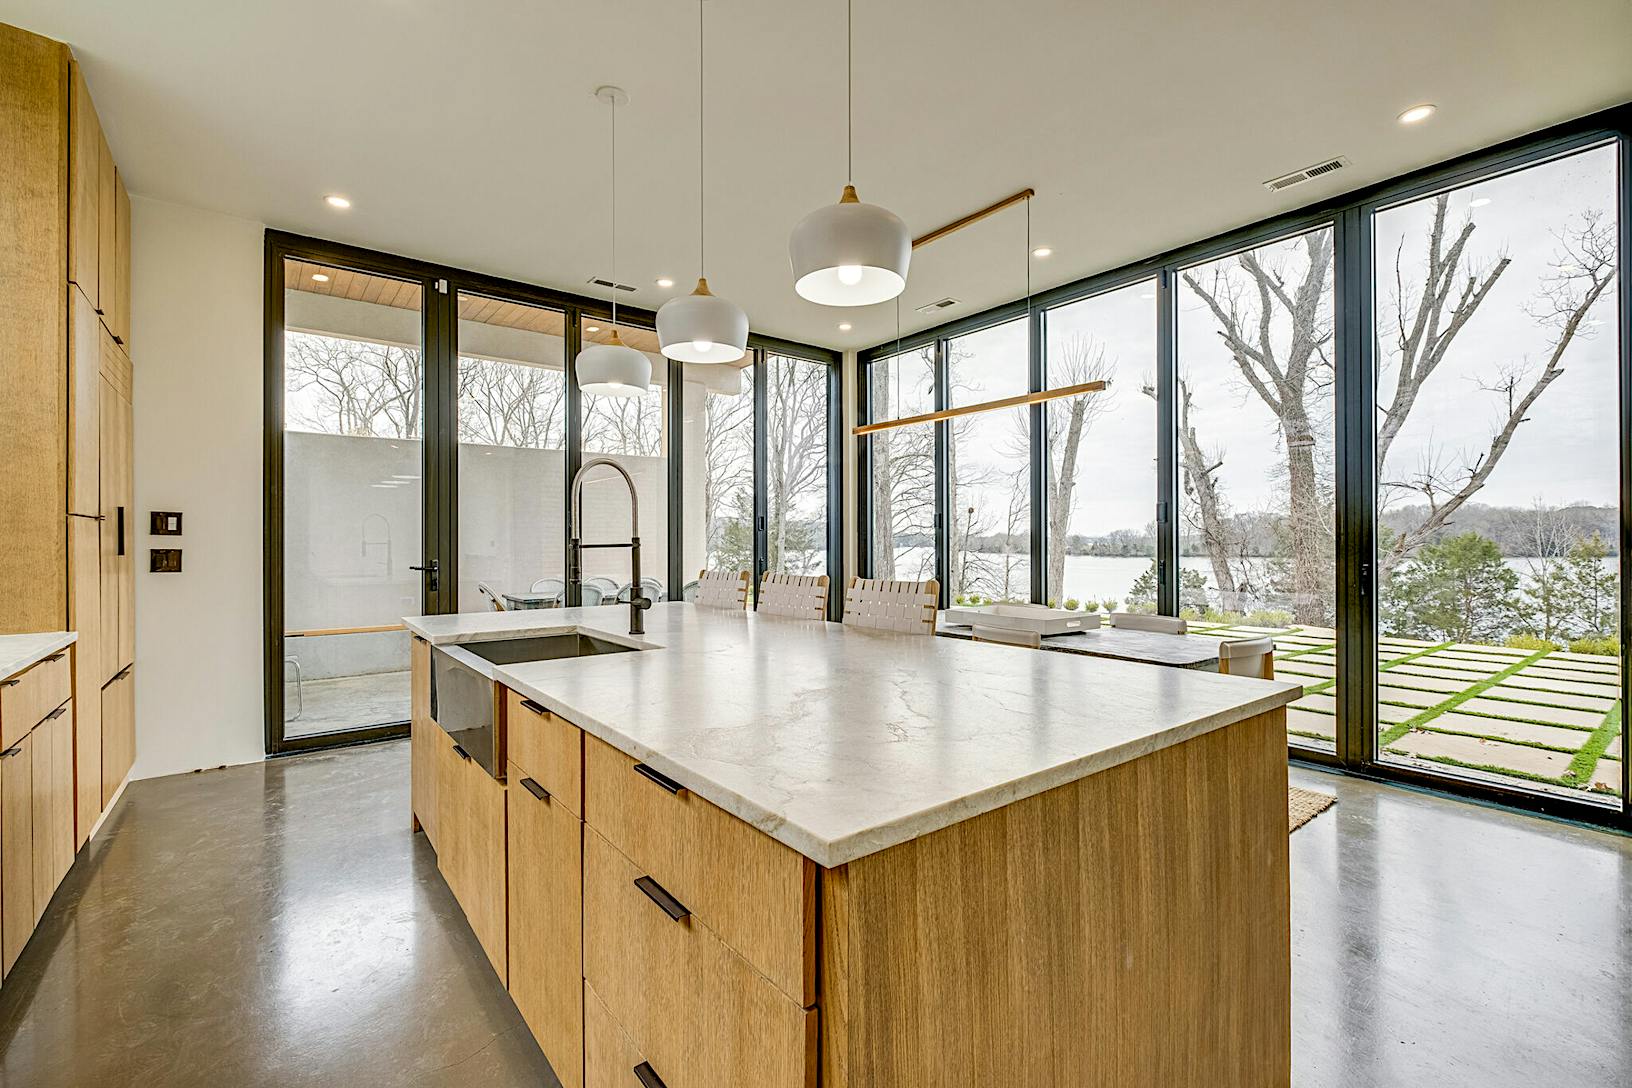 A modern kitchen featuring a large island with a stone countertop and large opening folding glass walls offering a view of the lake and trees in the background.